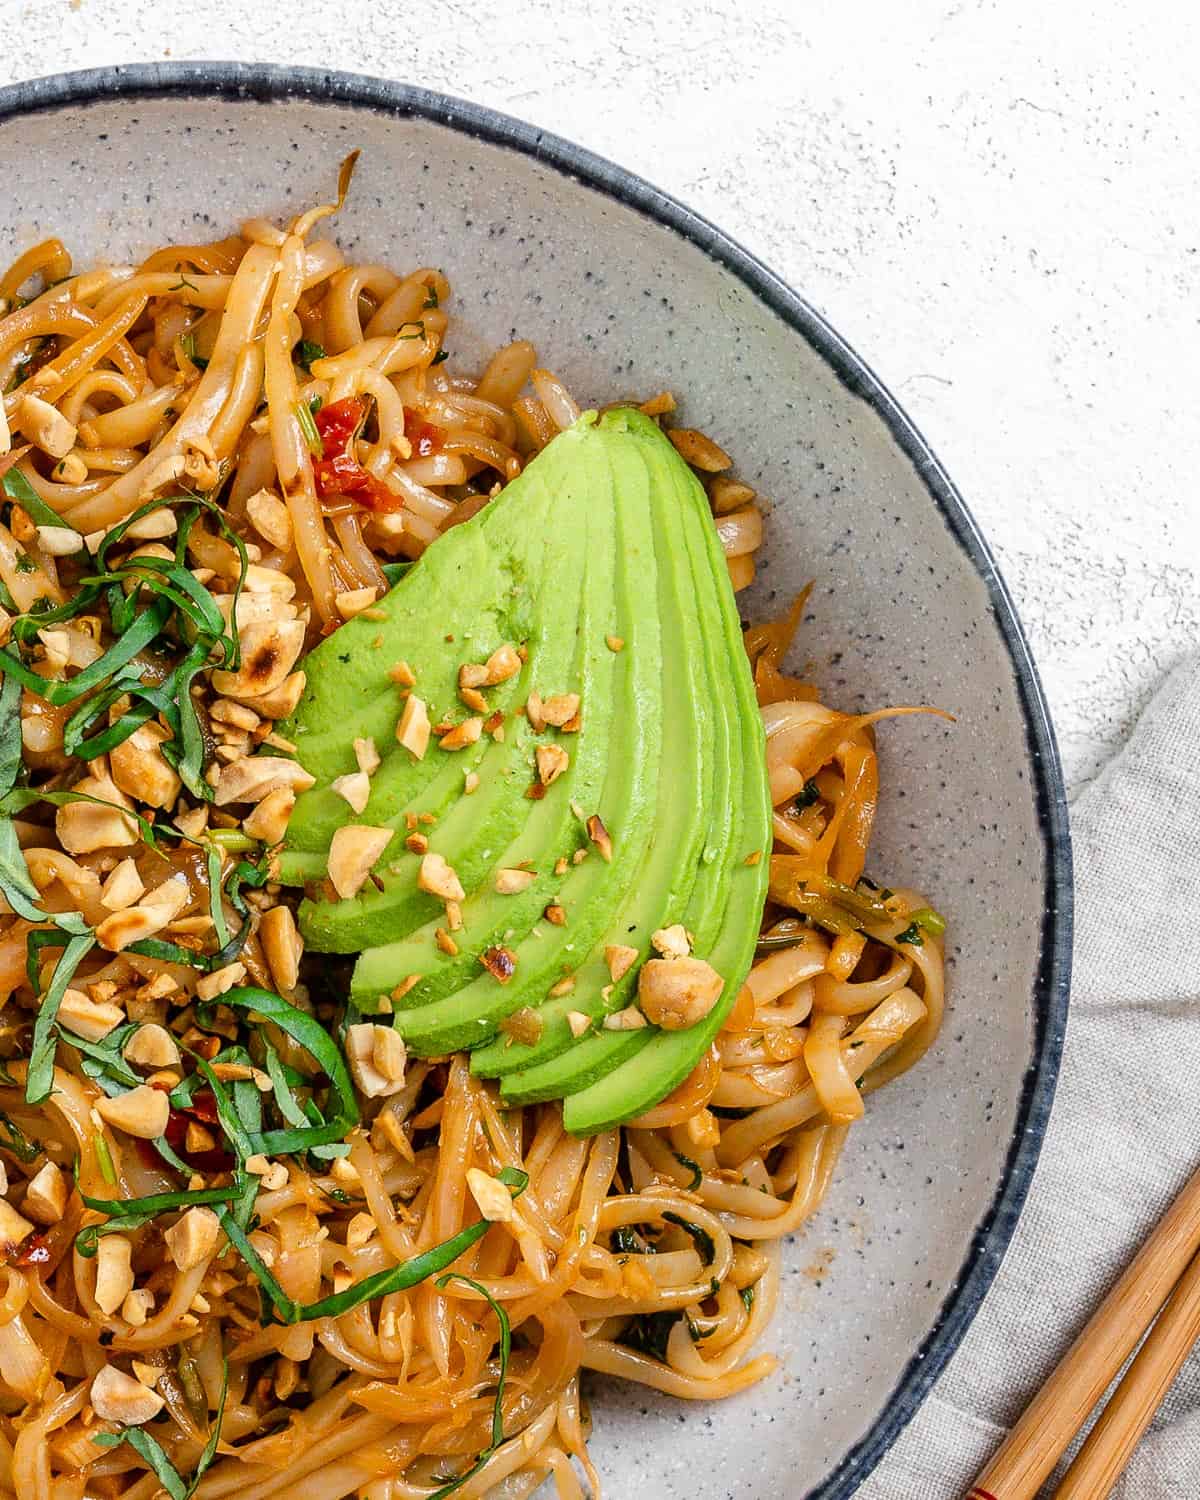 completed Vegan Vegetable Pad Thai plated against a light background